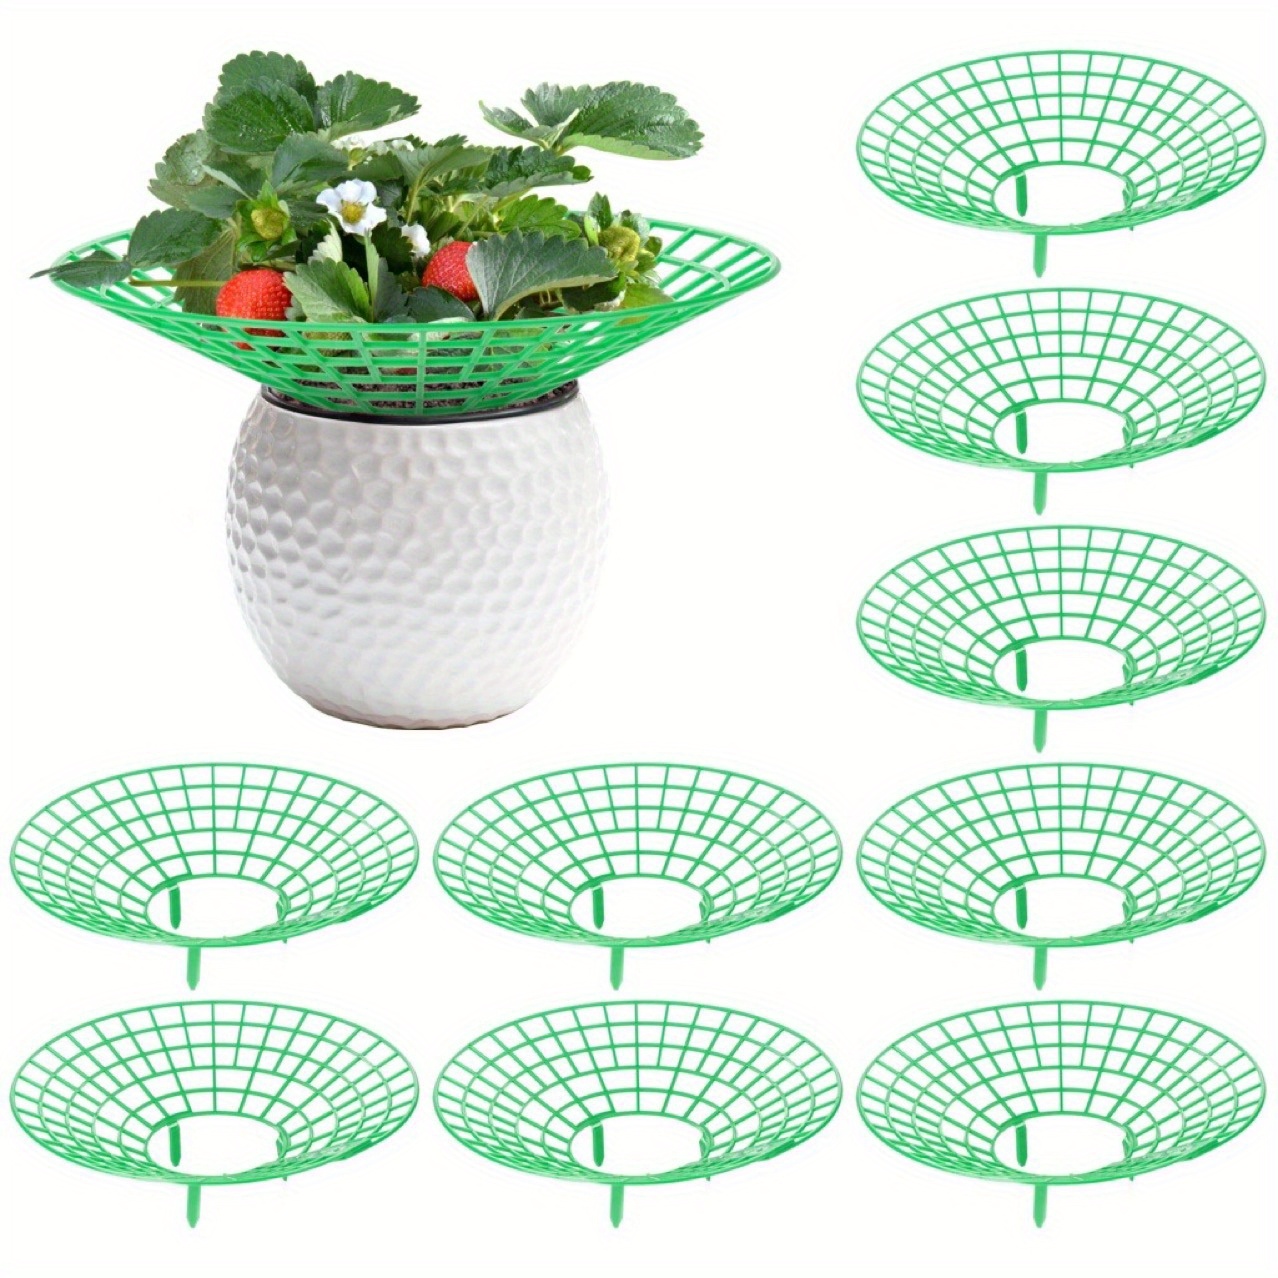 

10-pack Round Plastic Strawberry Support Stands - Garden Fruit Plant Care Accessories, Corrosion-resistant, Protects Strawberries & Melons